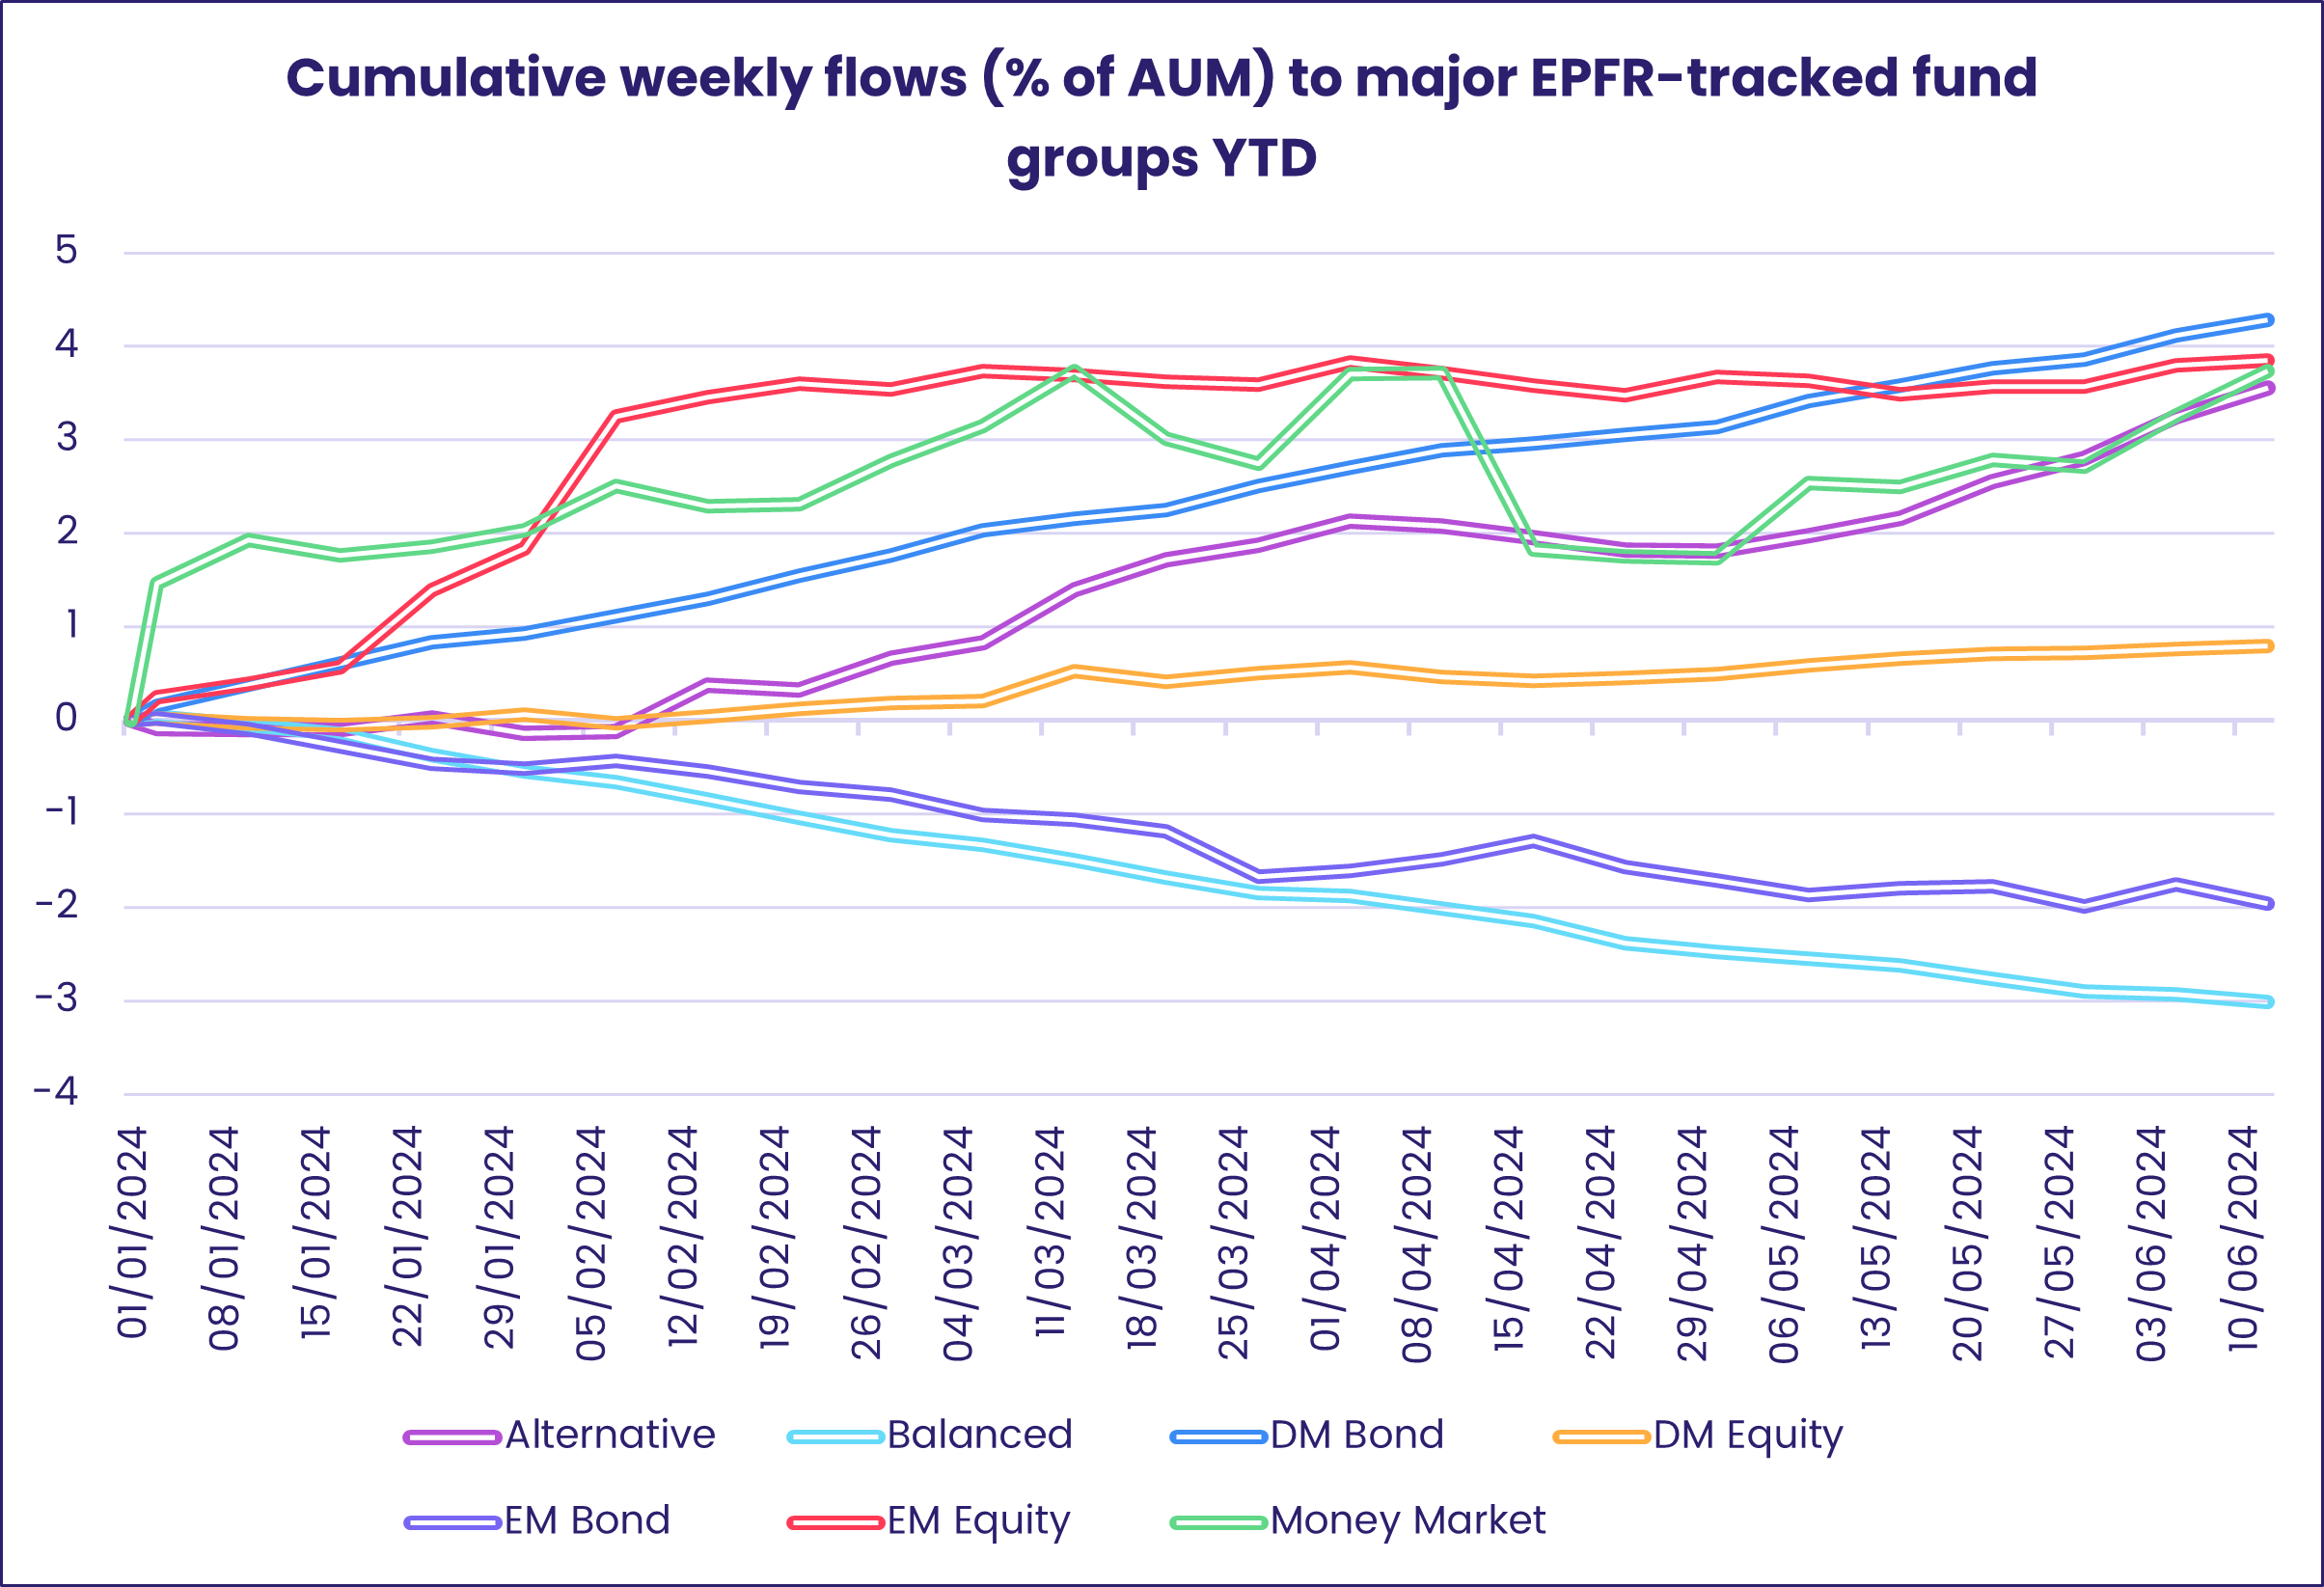 Chart representing 'Cumulative weekly flows (% of AUM) to major EPFR-tracked fund groups YTD'